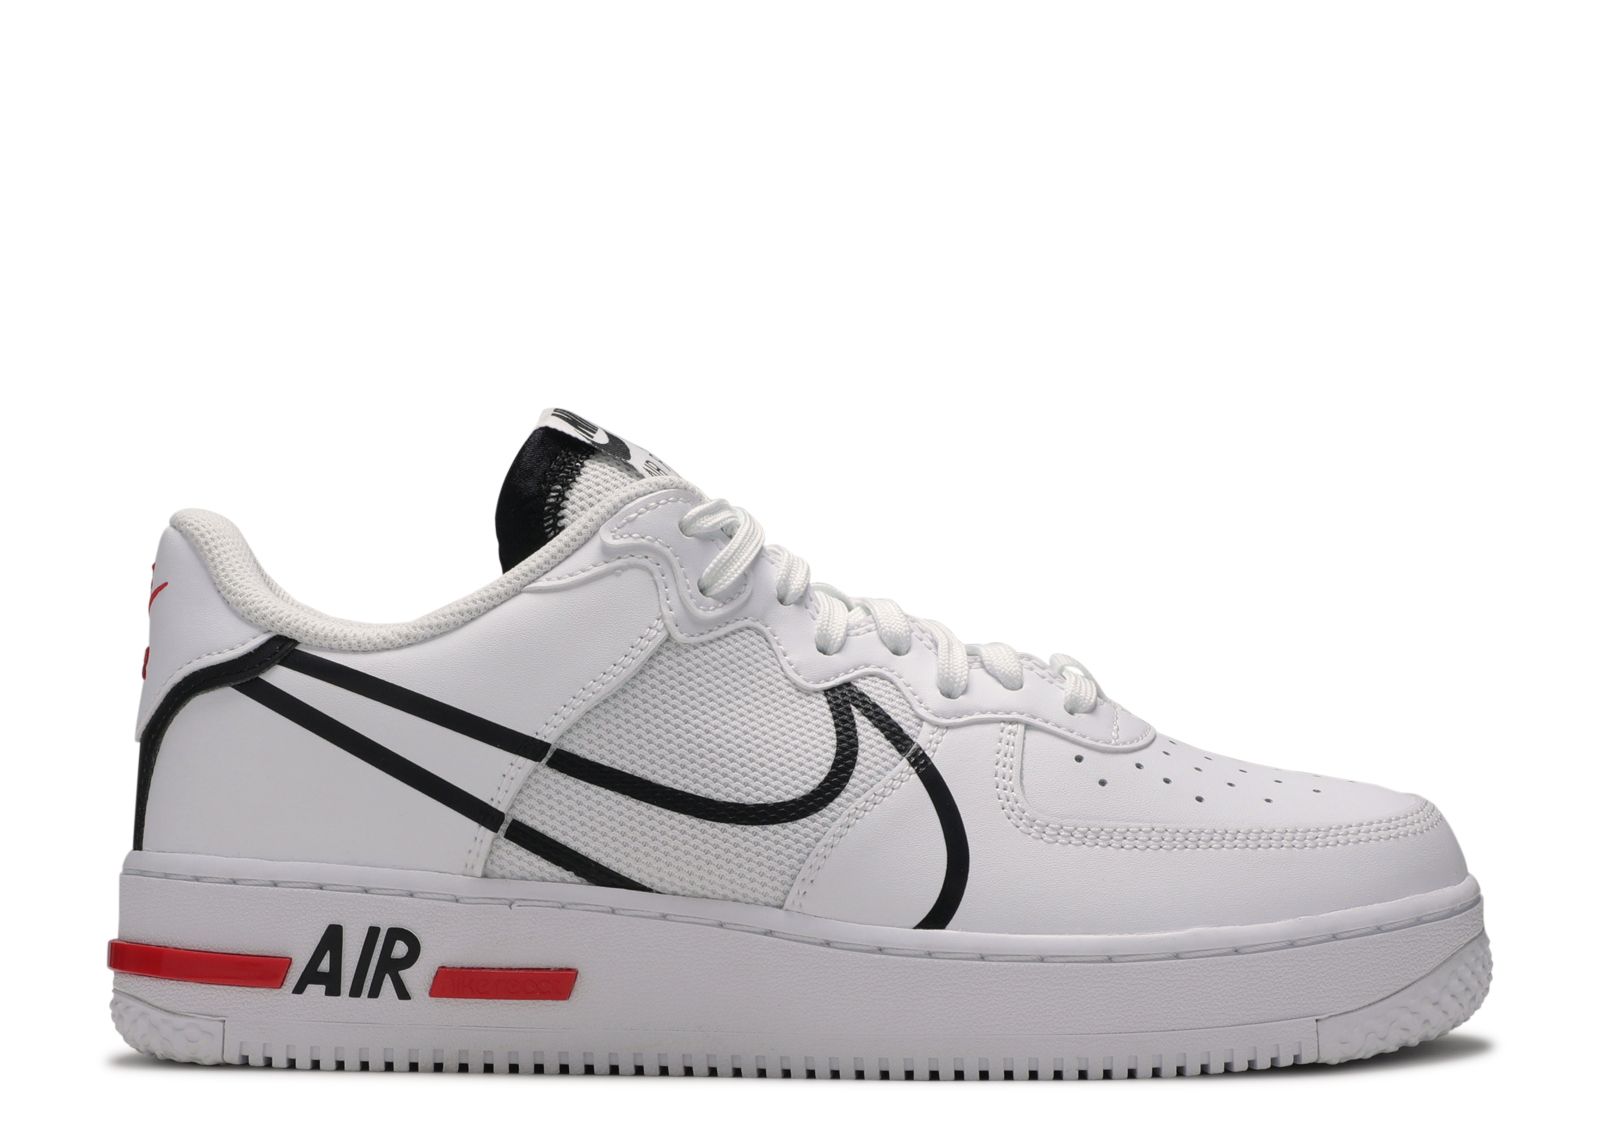 Кроссовки Nike Air Force 1 React 'D/Ms/X', белый 1 pcs d m9ba d m9na d m9pa d m9nw d m9pw d m9bw smc air pneumatic cylinder magnetic reed switch sensor